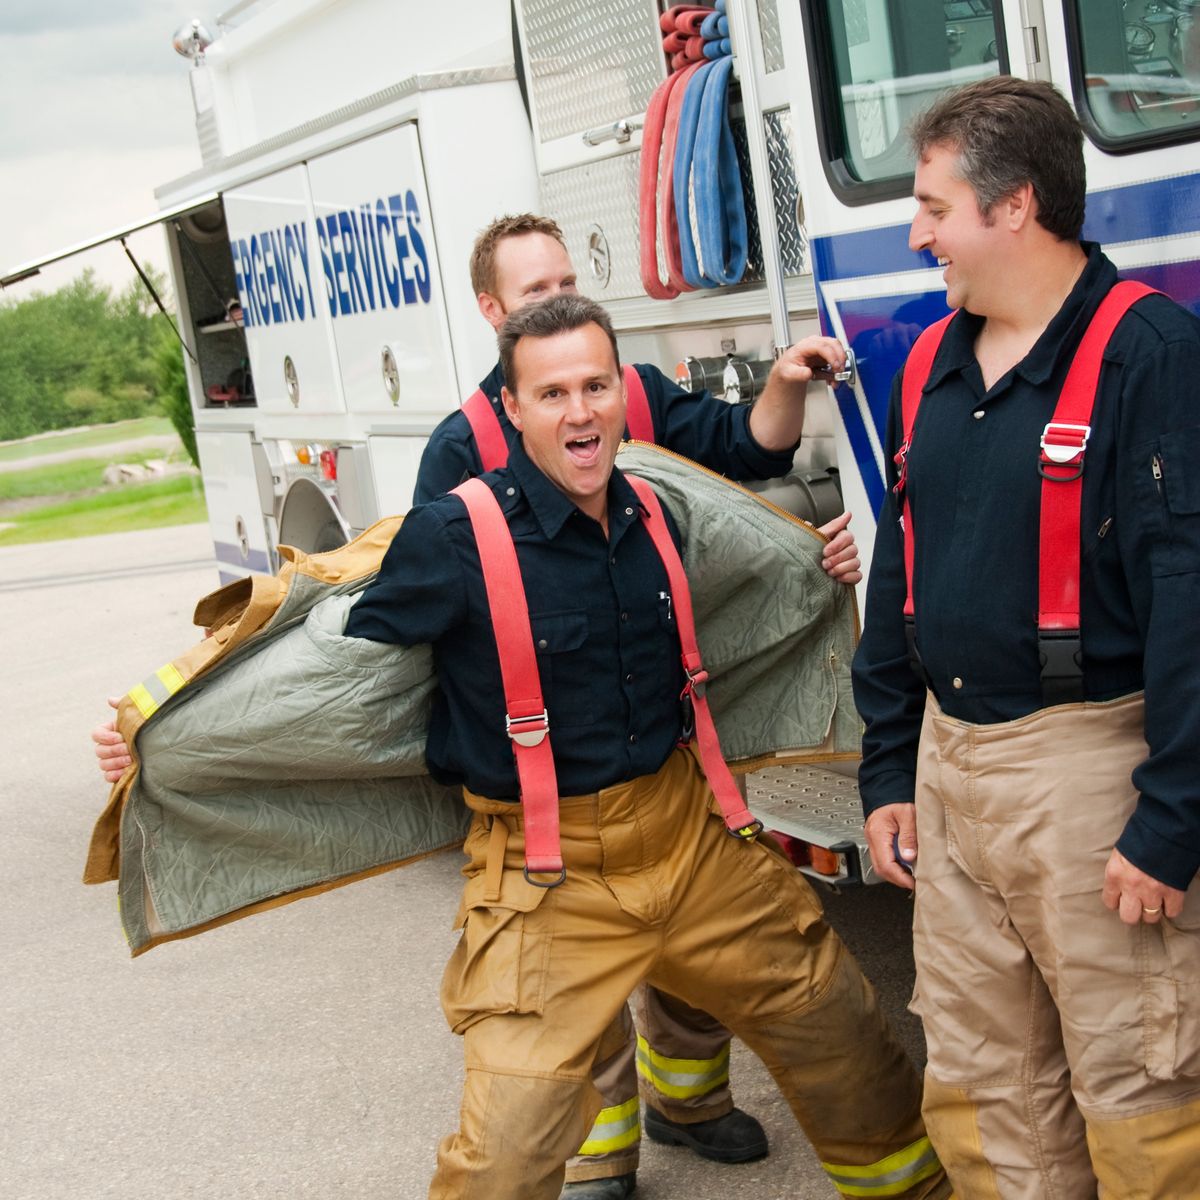 Photos of firefighters laughing